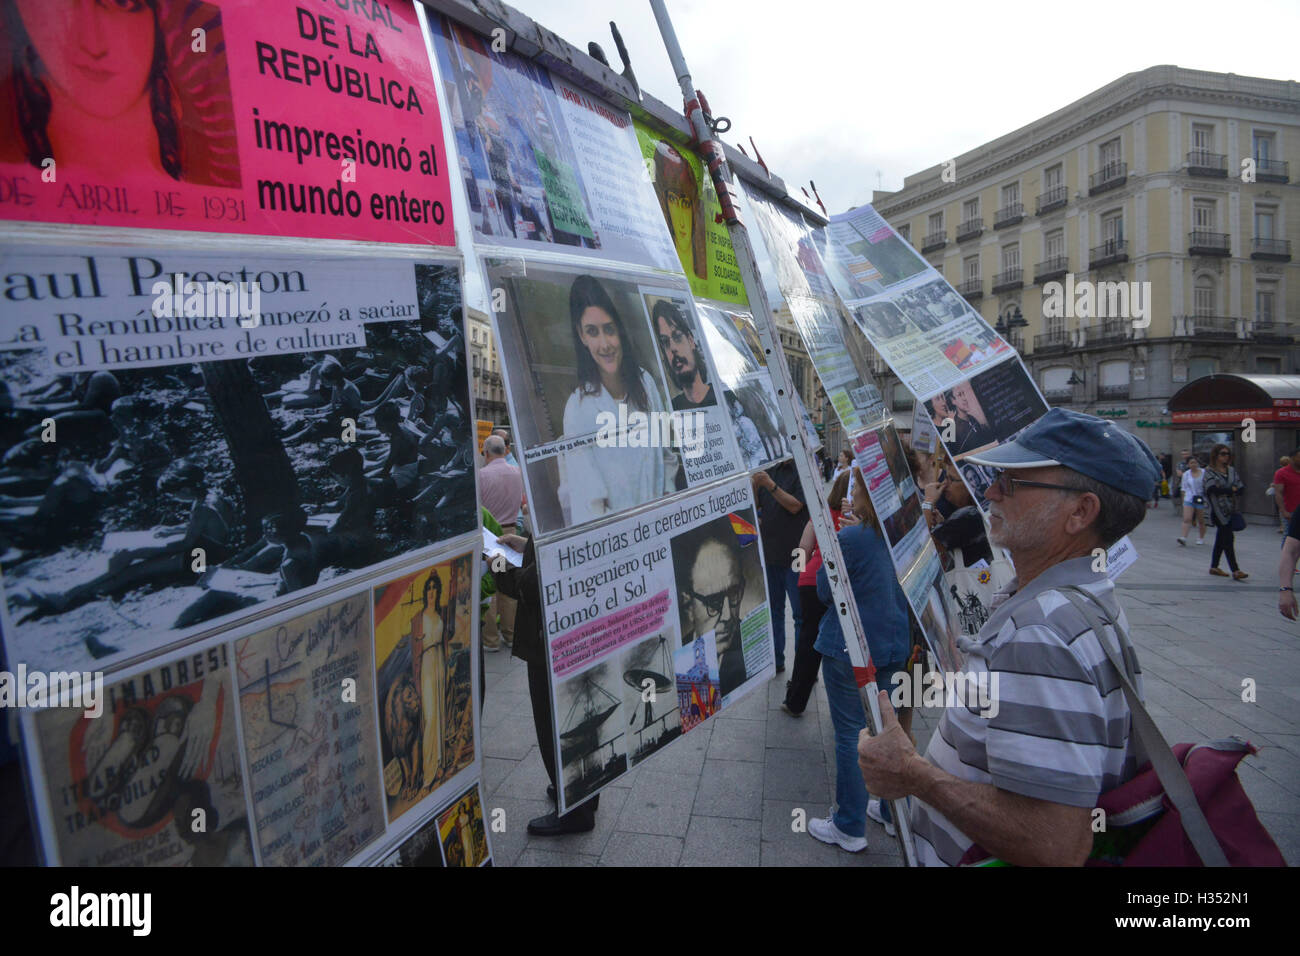 June 11, 2015 - FAMILIES OF THE MISSING REPUBLICANS FROM THE SPAINISH CIVIL WAR 1936-39, AND THE FRANCO DICTATORSHIP, GATHER AT PUERTA DEL SOL, THE CENTER OF MADRID, ACROSS FROM THE MUNICIPAL BUILDING WHERE MANY WERE IMPRISONED AND TORTURED. THEY ARE DEMANDING TO KNOW WHAT HAPPENED TO THEIR RELATIVES AND WHERE THEIR BODIES MIGHT BE LOCATED SO MANY YEARS LATER. © Kenneth Martin/ZUMA Wire/Alamy Live News Stock Photo